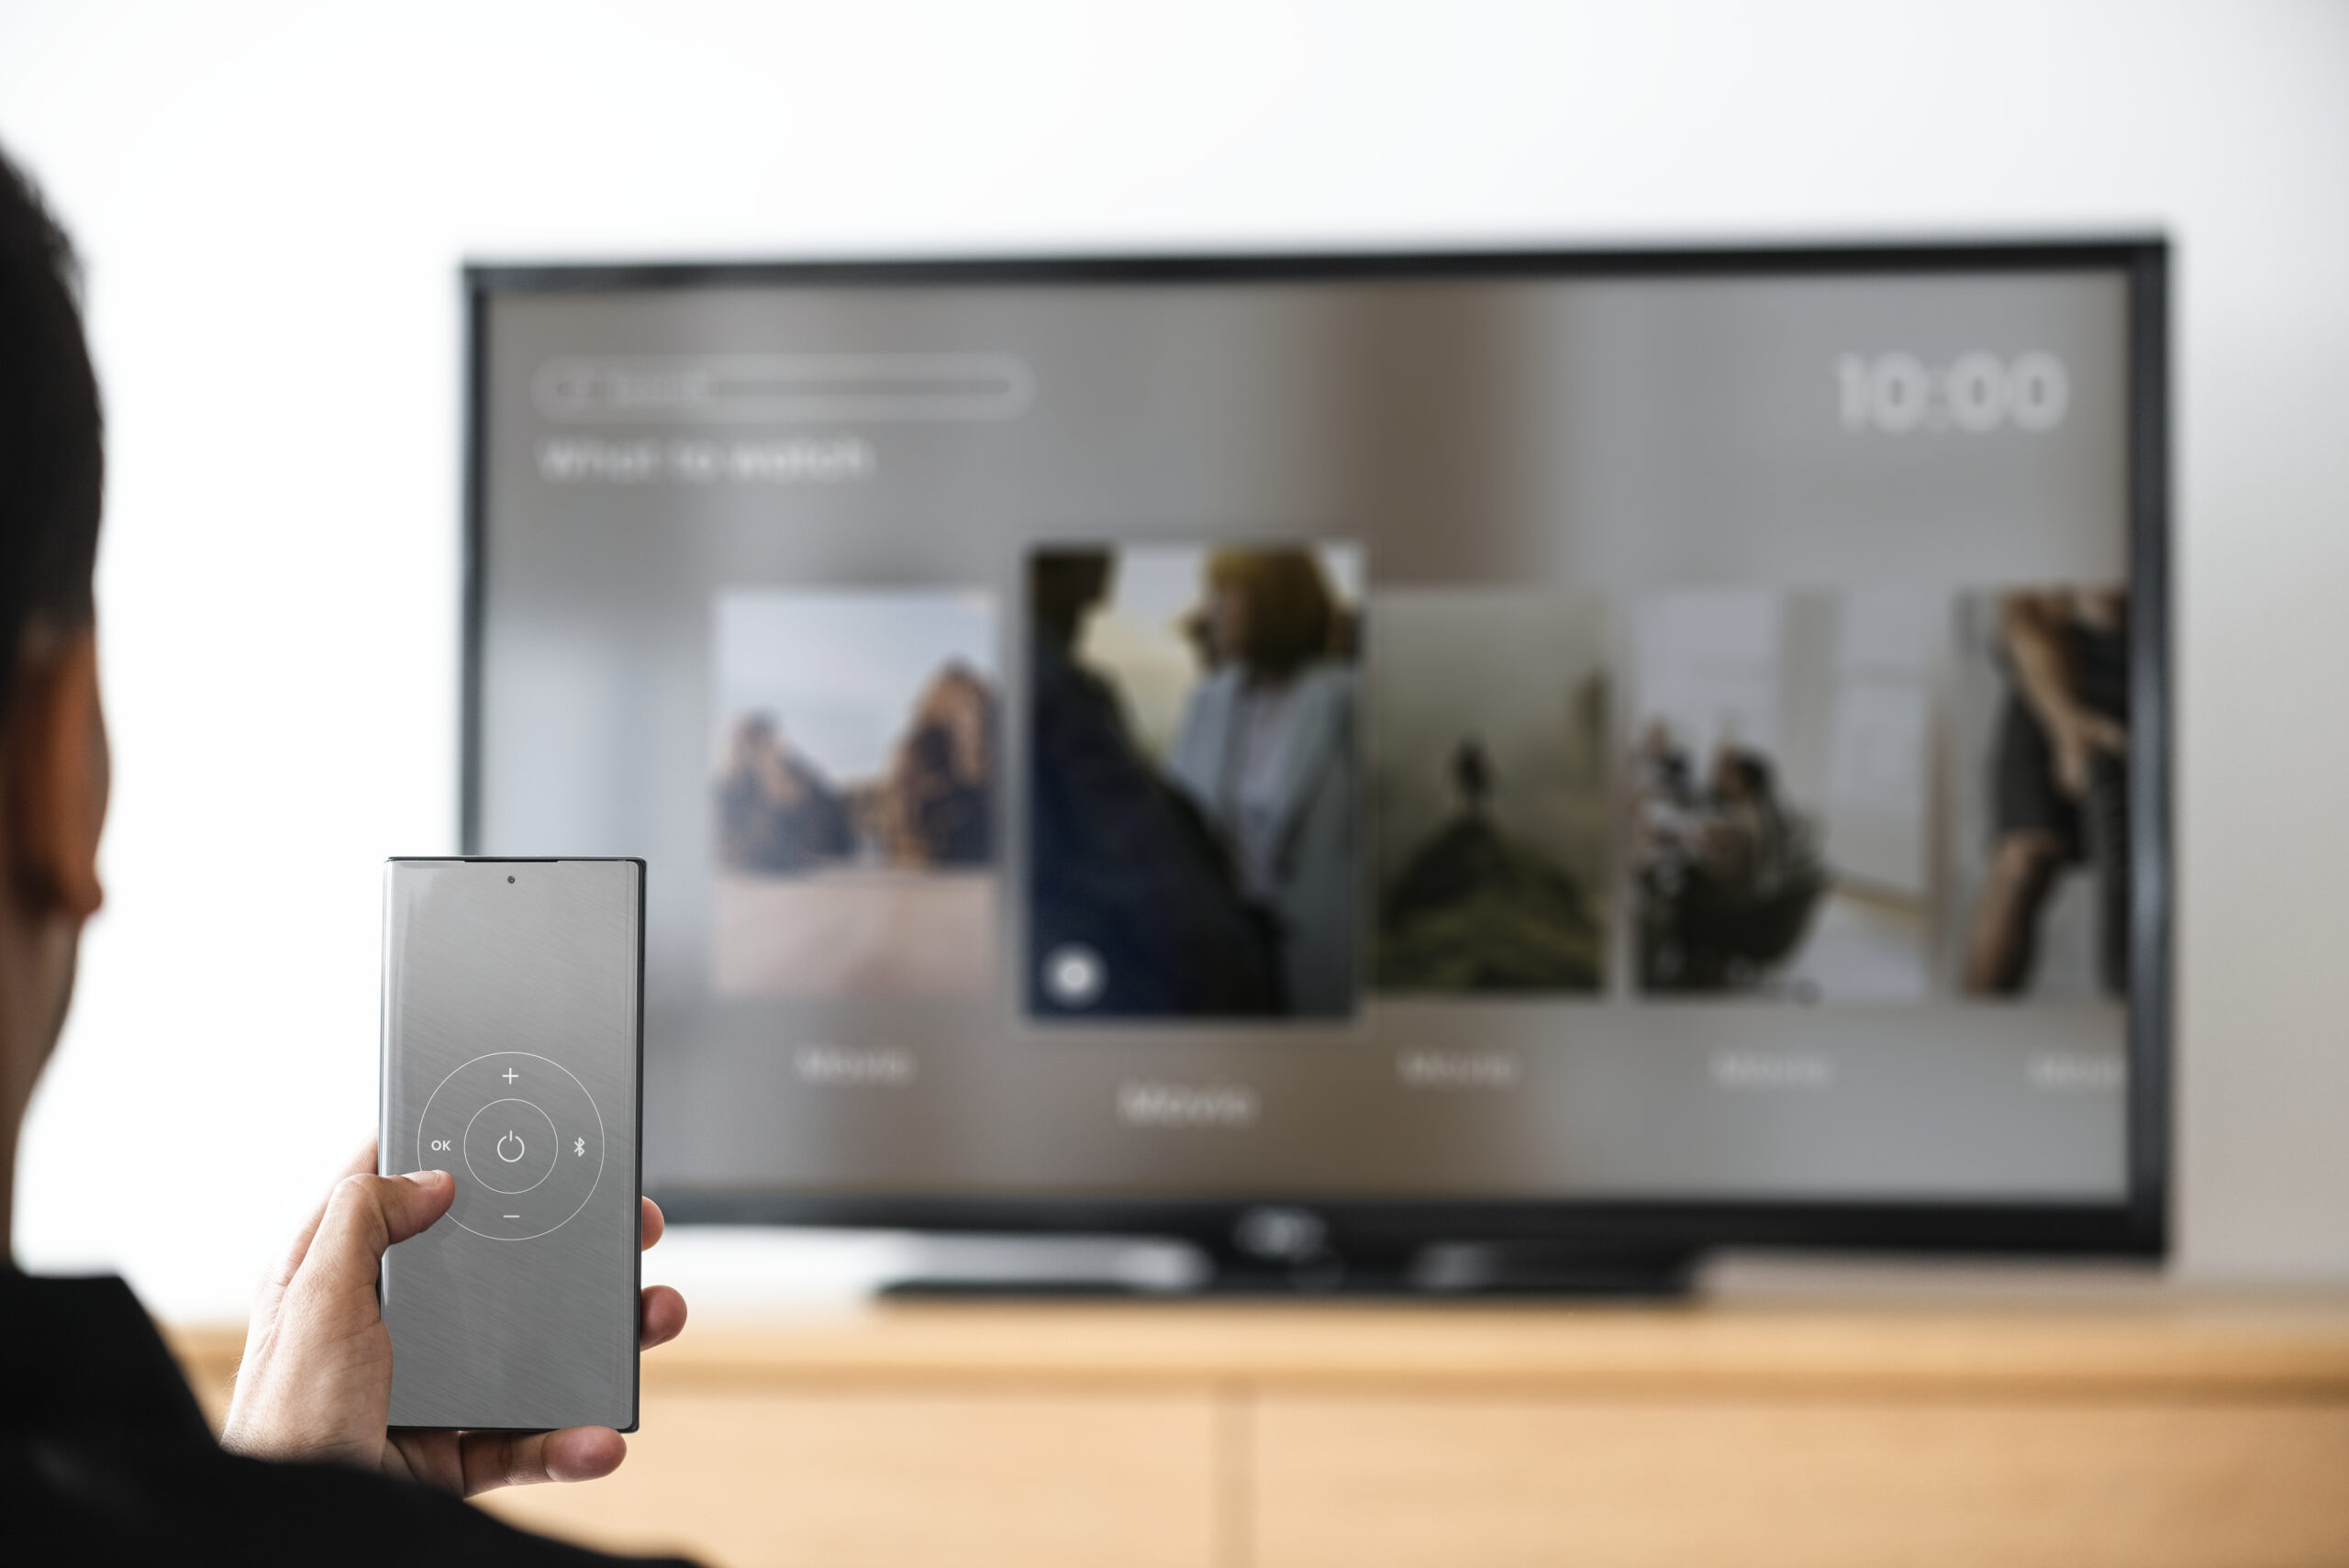 how to connect a smartphone to a tv?